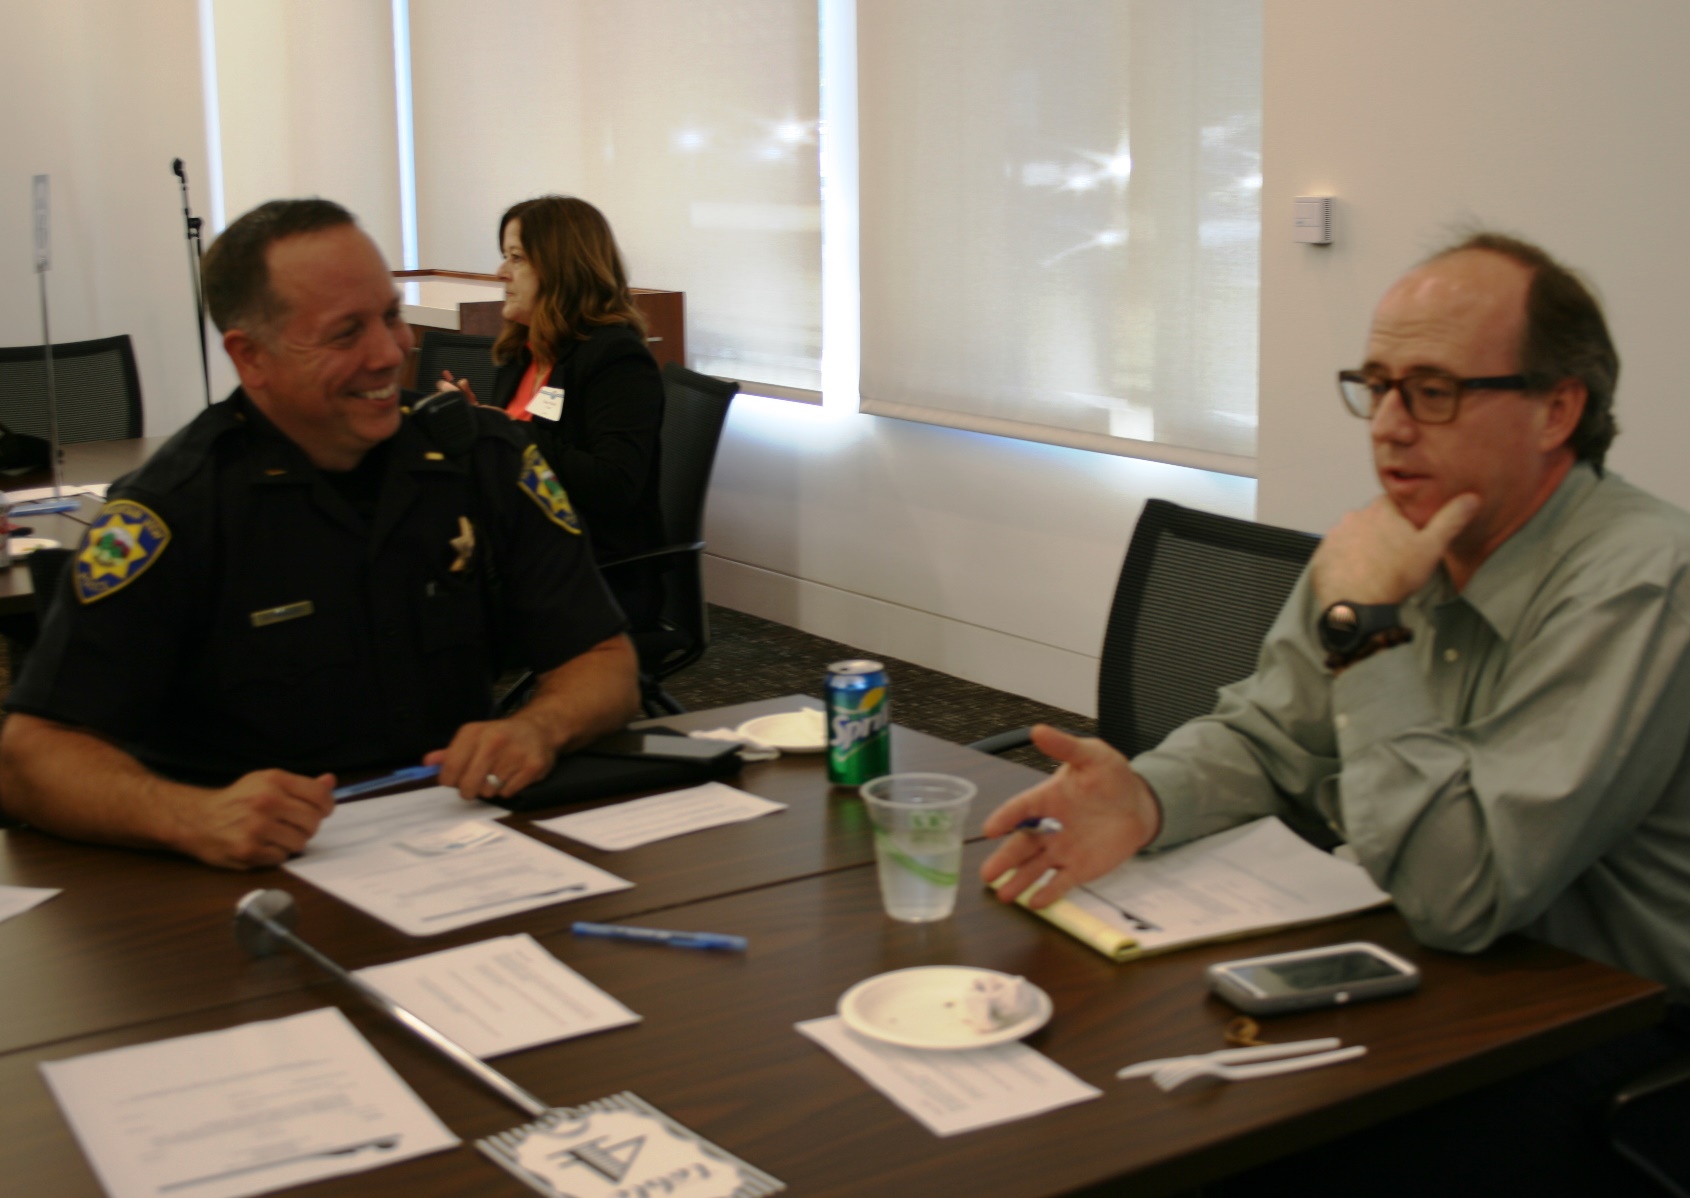 Police officer and City employee at conference table